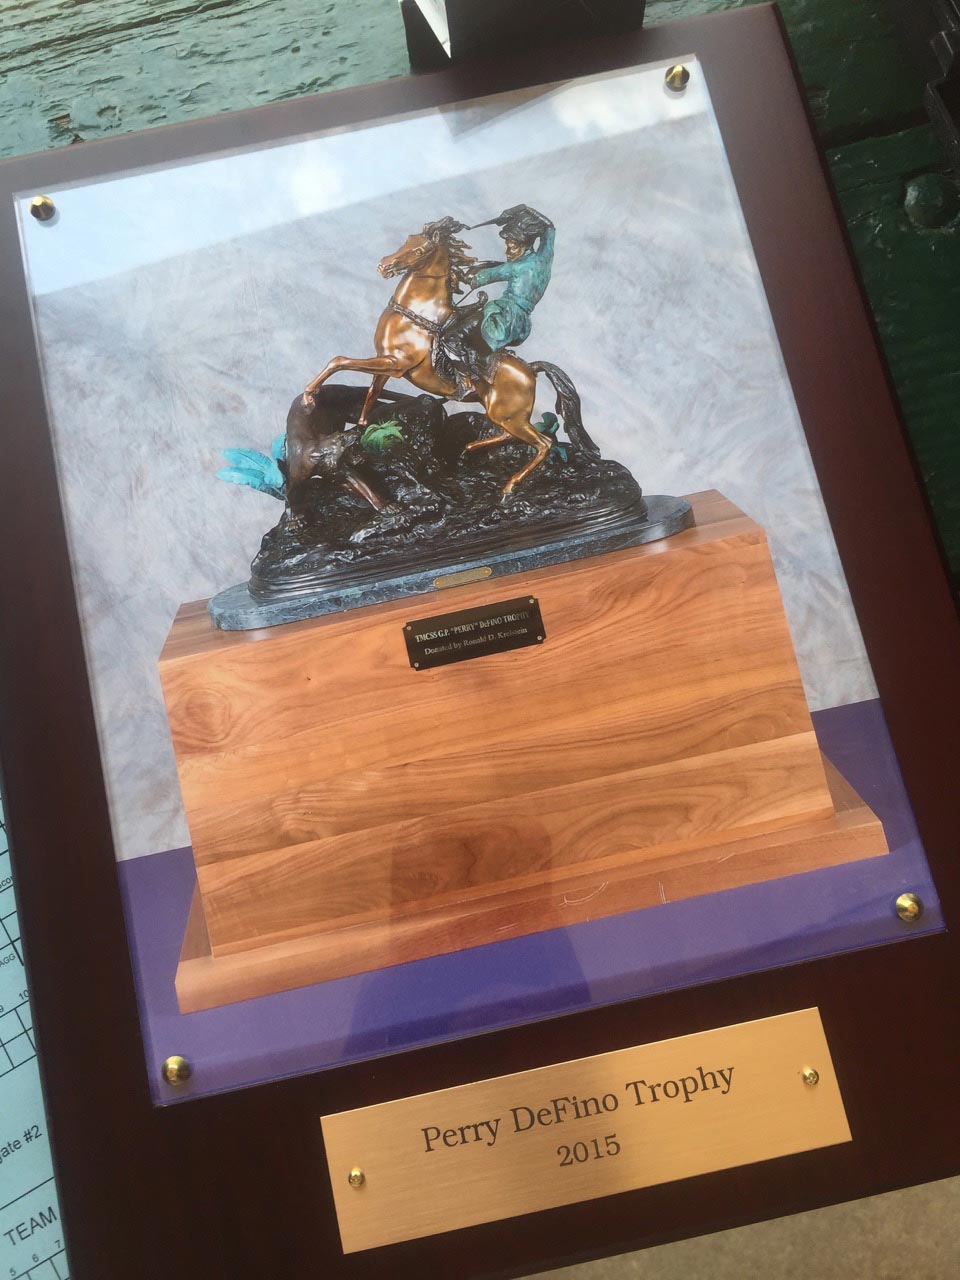 Sam’s G.P. Perry DeFino Trophy – Since 1984, the Junior Pistol Trophy has been presented to the high individual junior shooter in the National Trophy Individual Pistol Match.